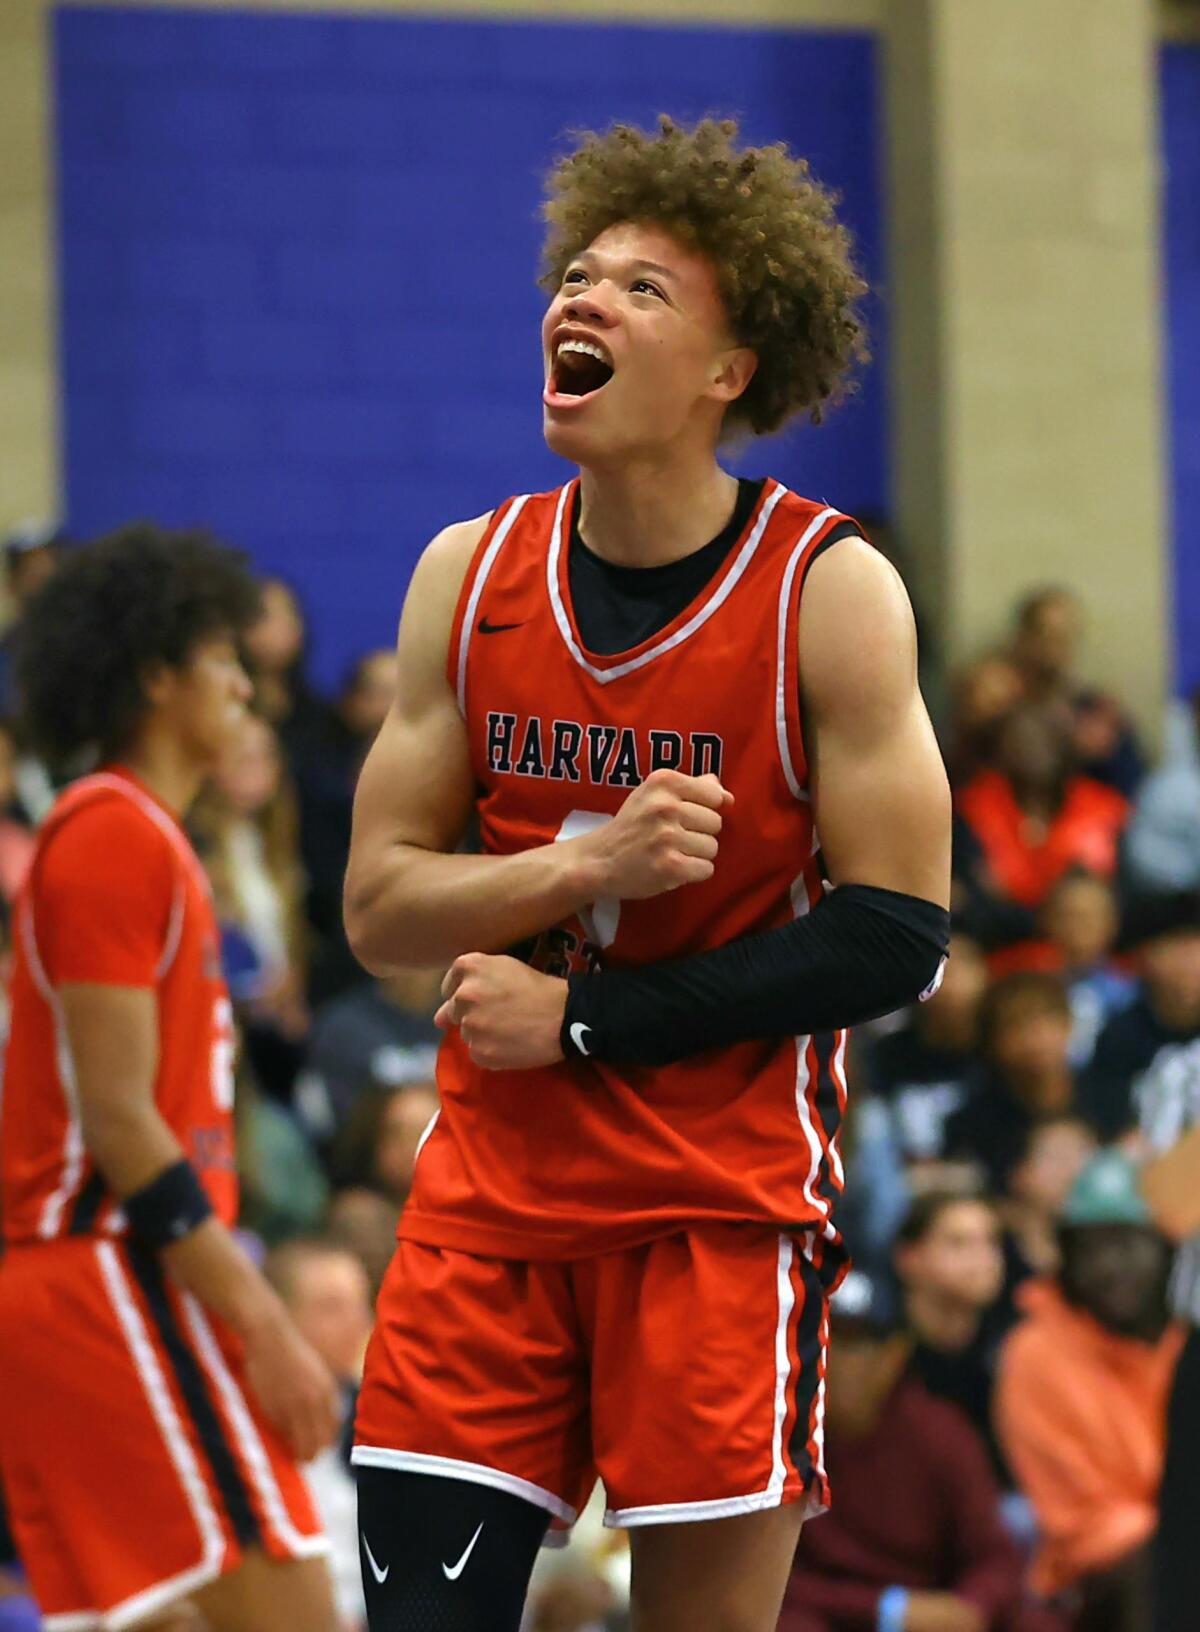 USC-bound guard Trent Perry of Harvard-Westlake yells on the court